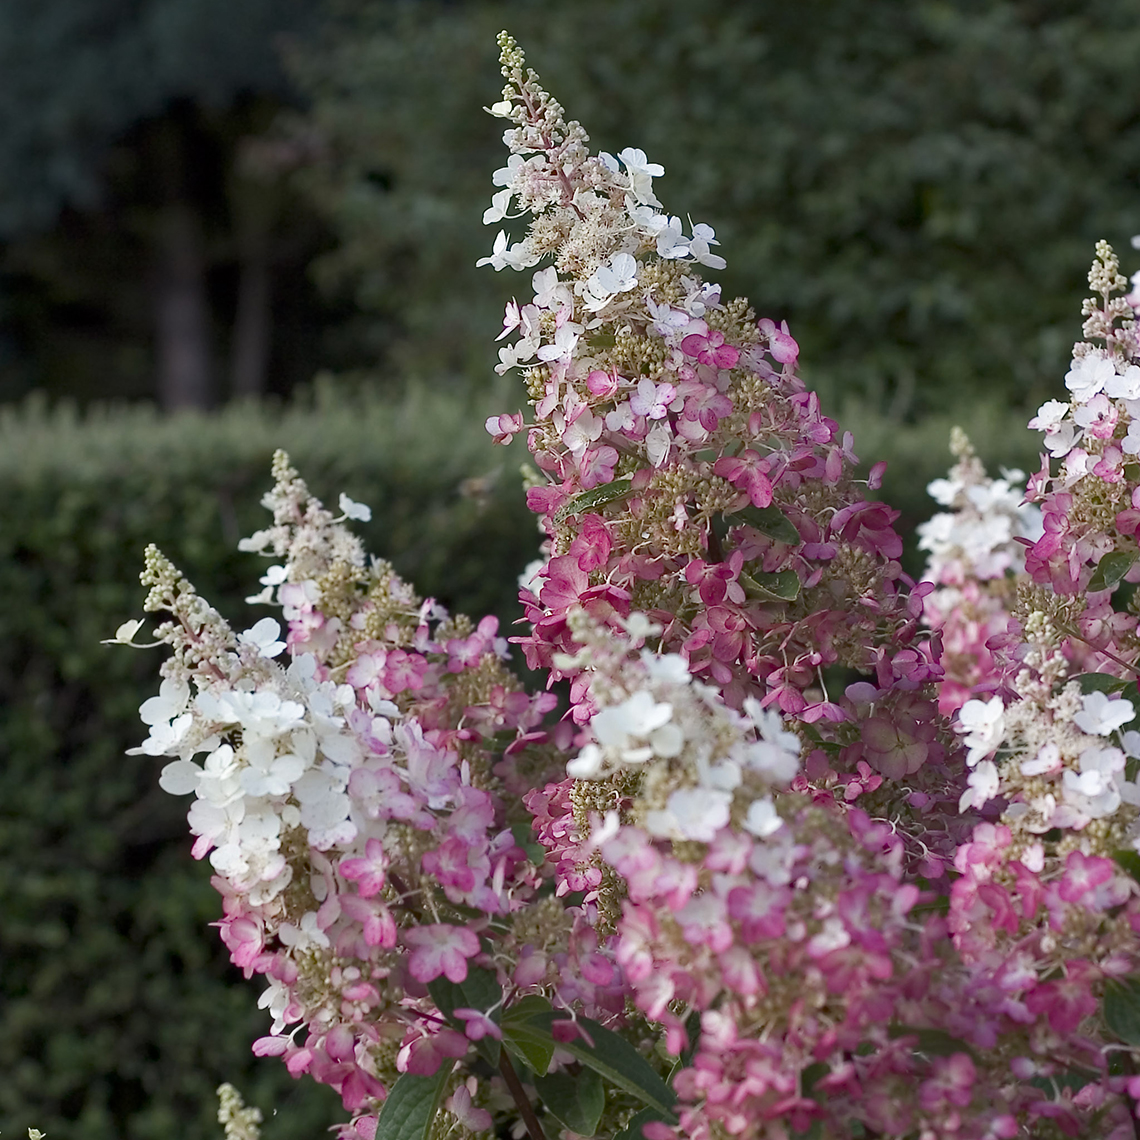 Closeup of the extra large lacecap blooms of Pinky Winky panicle hydrangea showing pink to white coloring